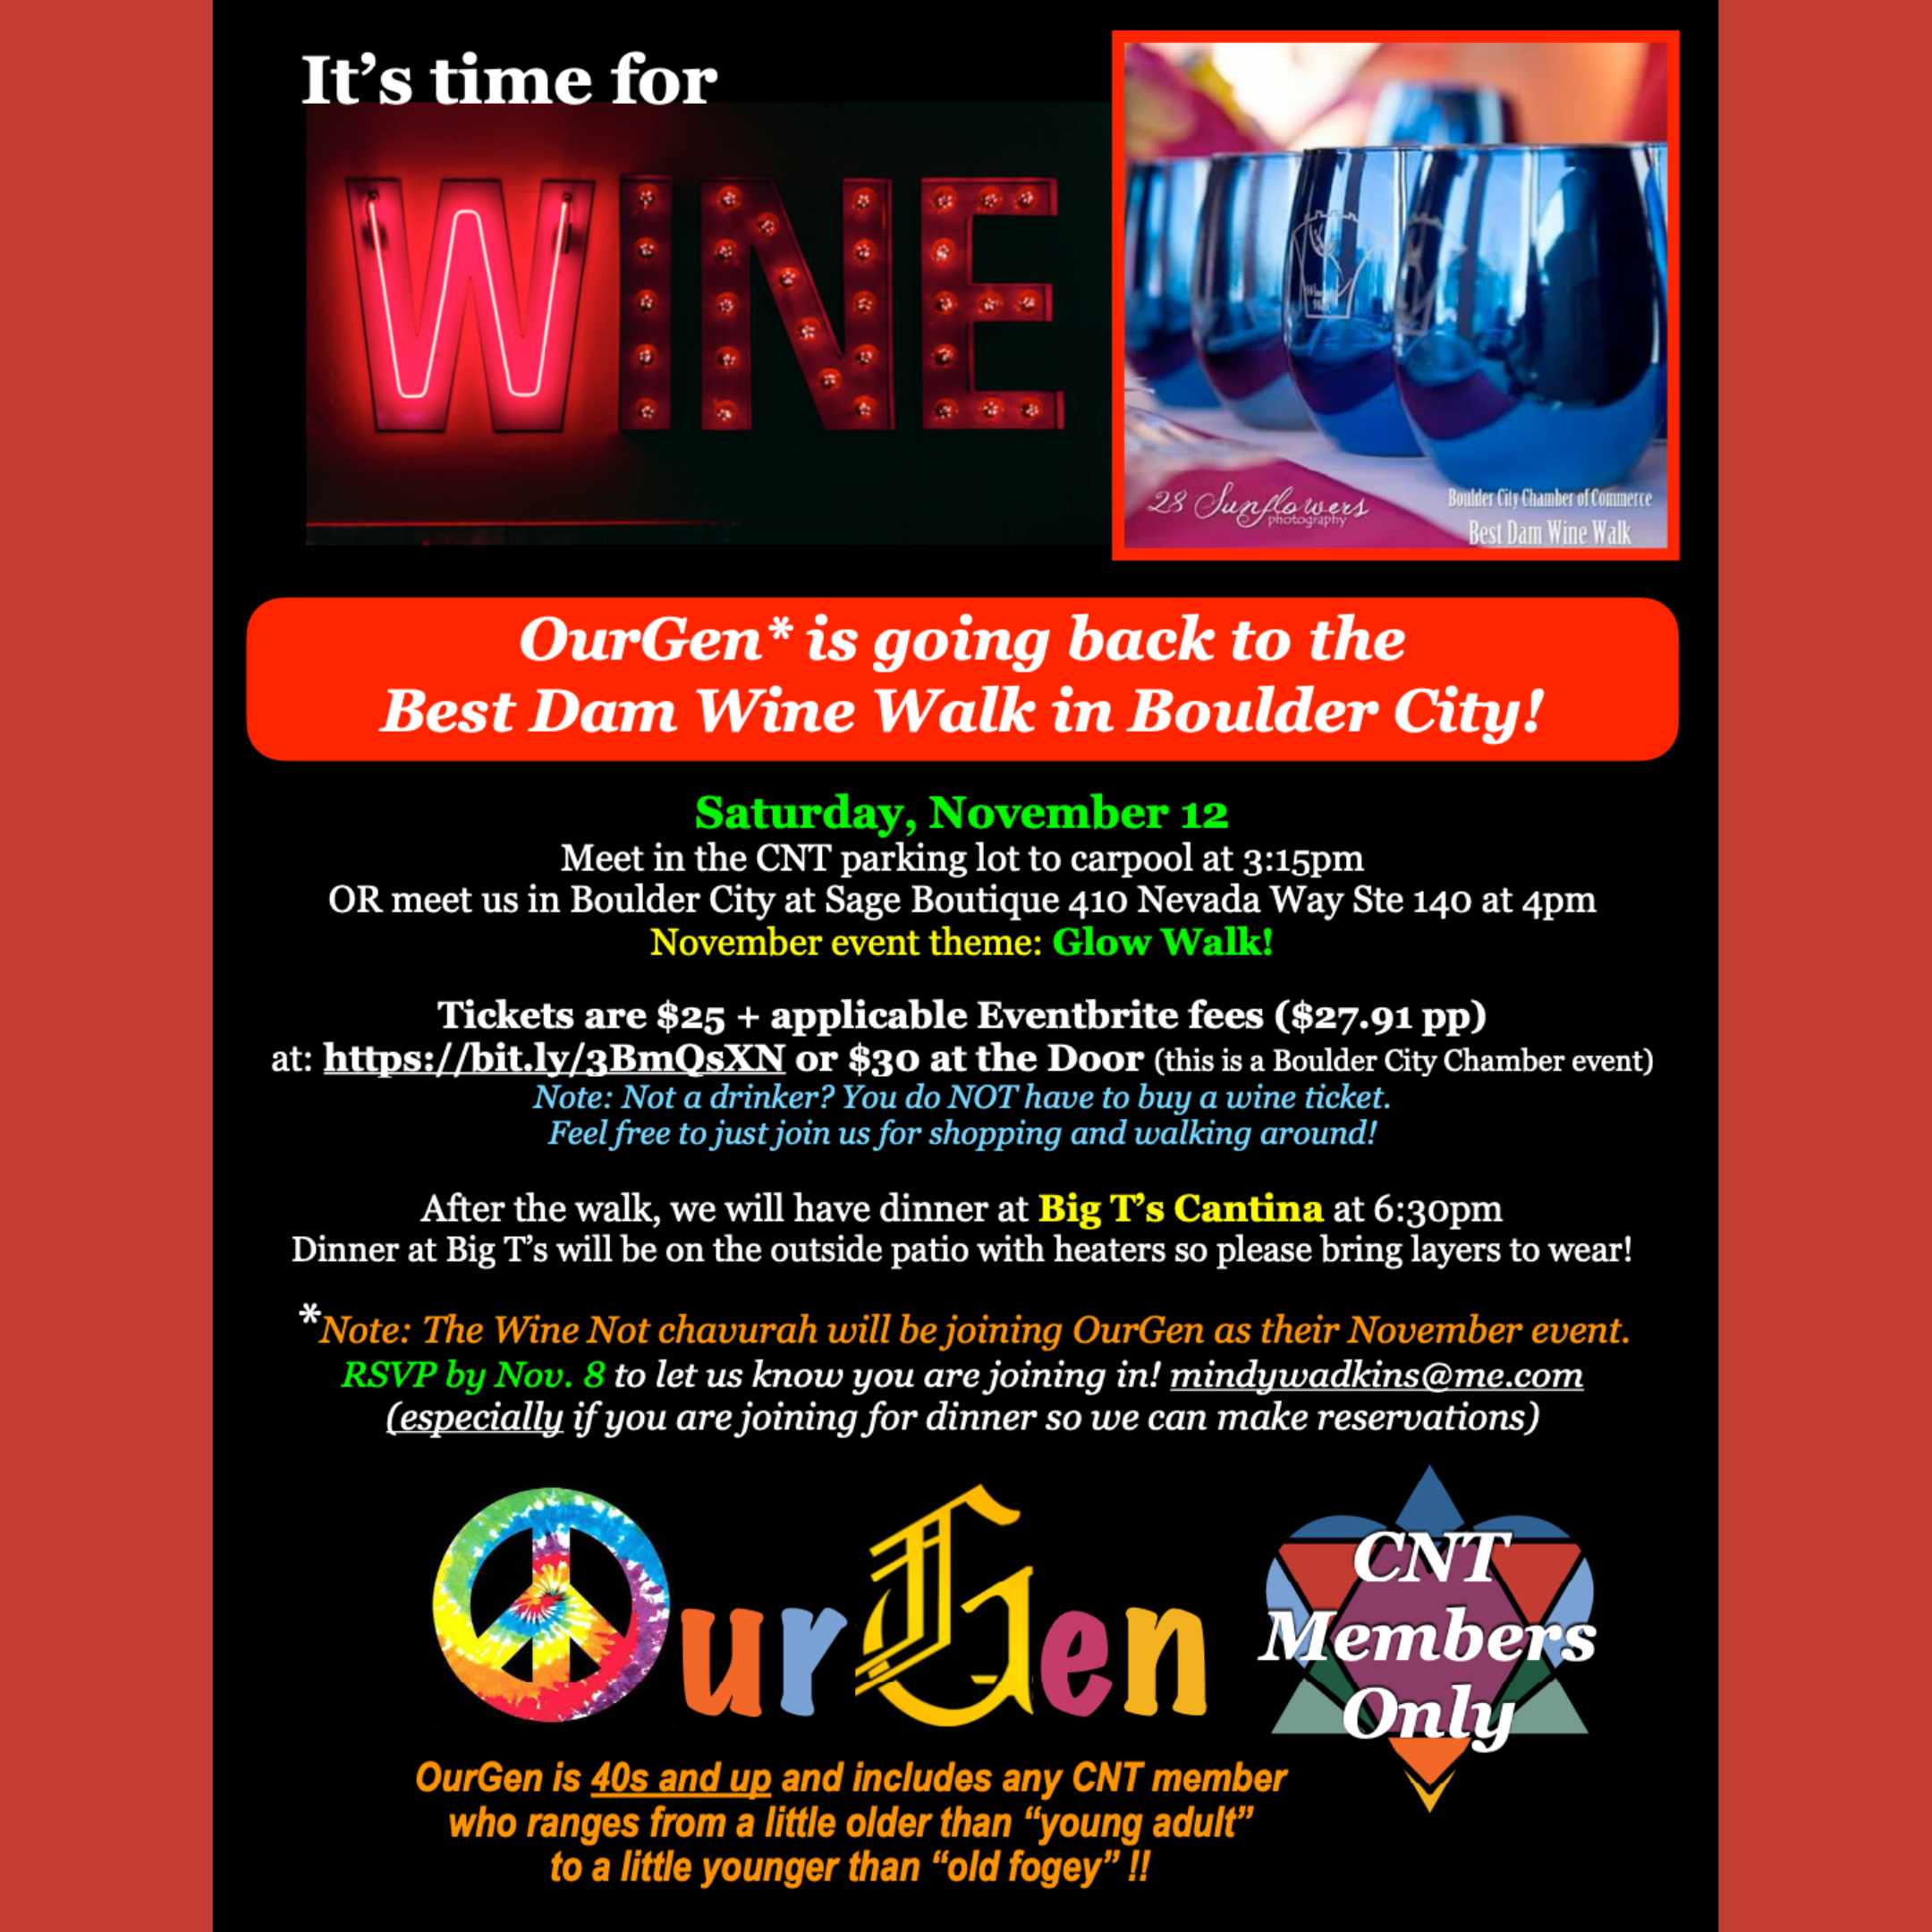 OURGEN'S BOULDER CITY WINE WALK AND DINNER